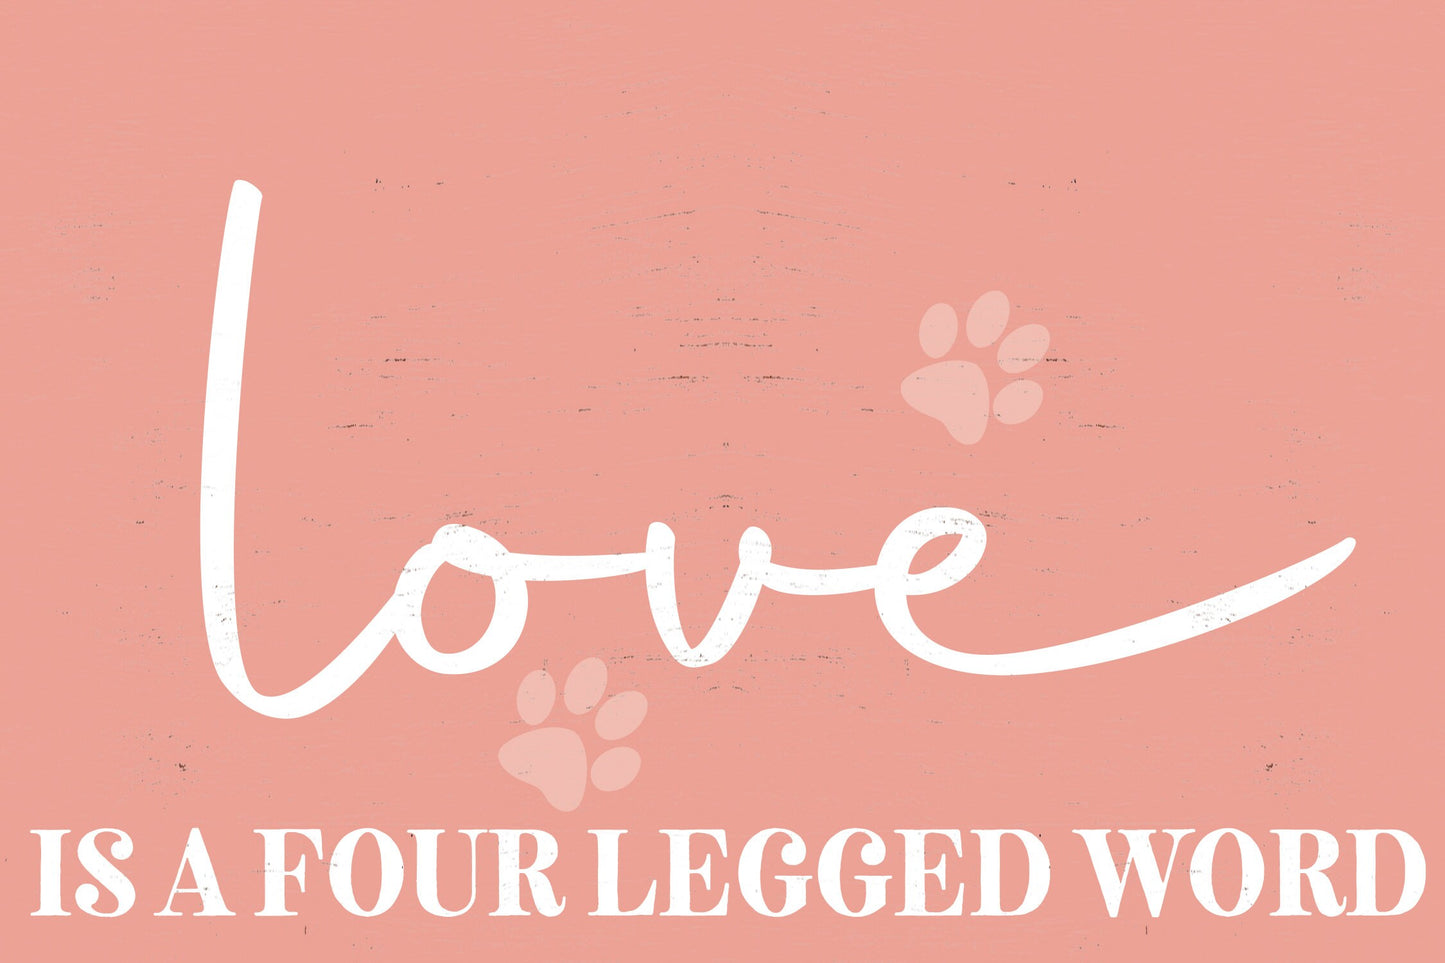 Love Is A Four Legged Word - 7.5x5in Wall Decor - Charming Wooden Sign for Pet Lovers, Ideal for Home & Office, Great Gift Idea